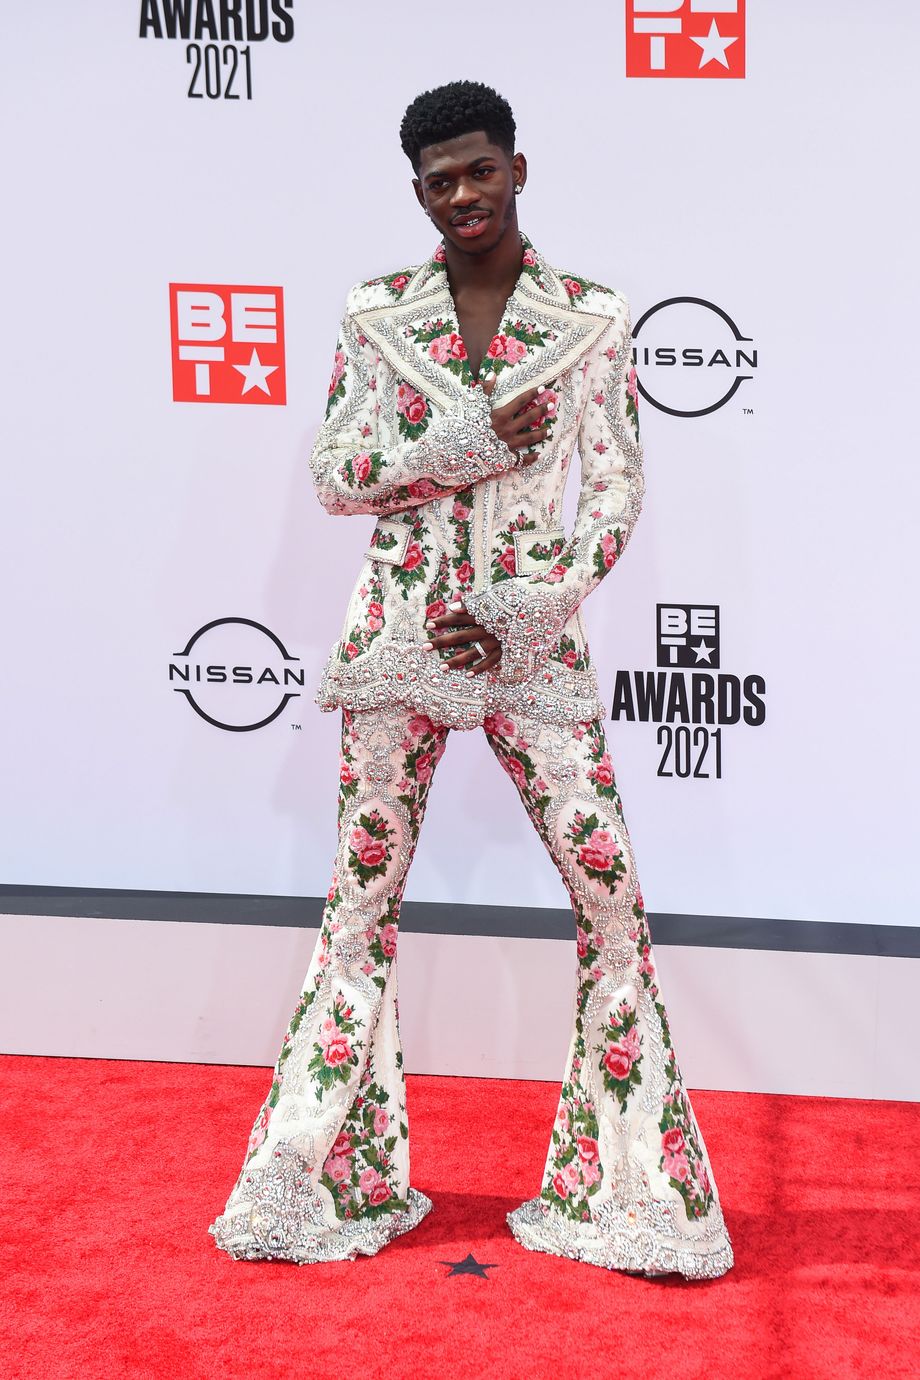 All of Cardi B's show-stopping 2021 AMAs red carpet looks